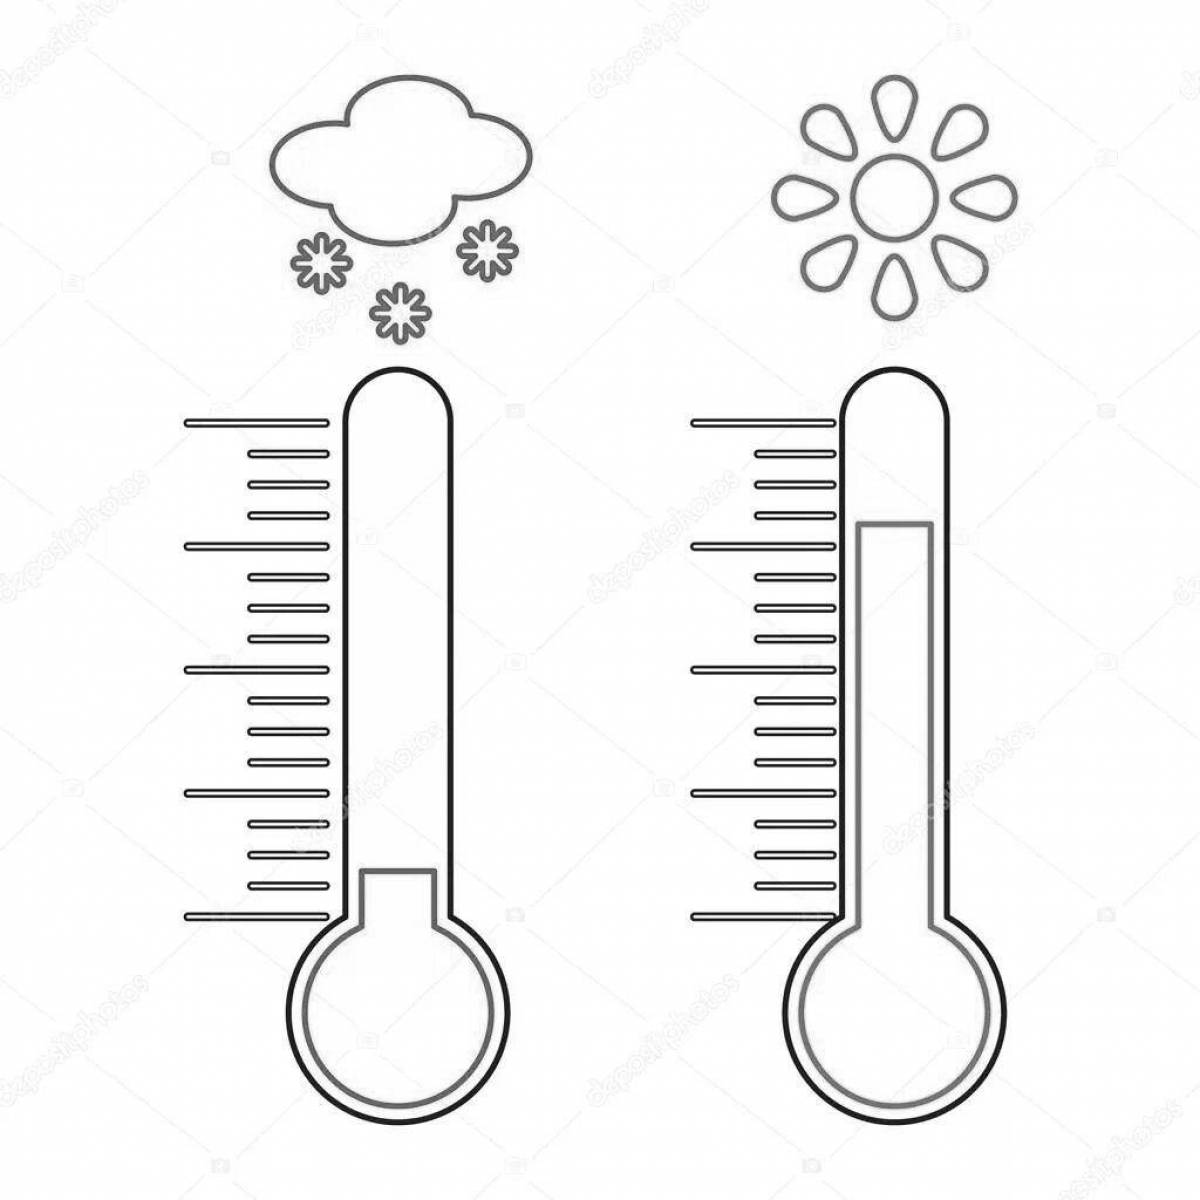 Fun coloring thermometer for kids